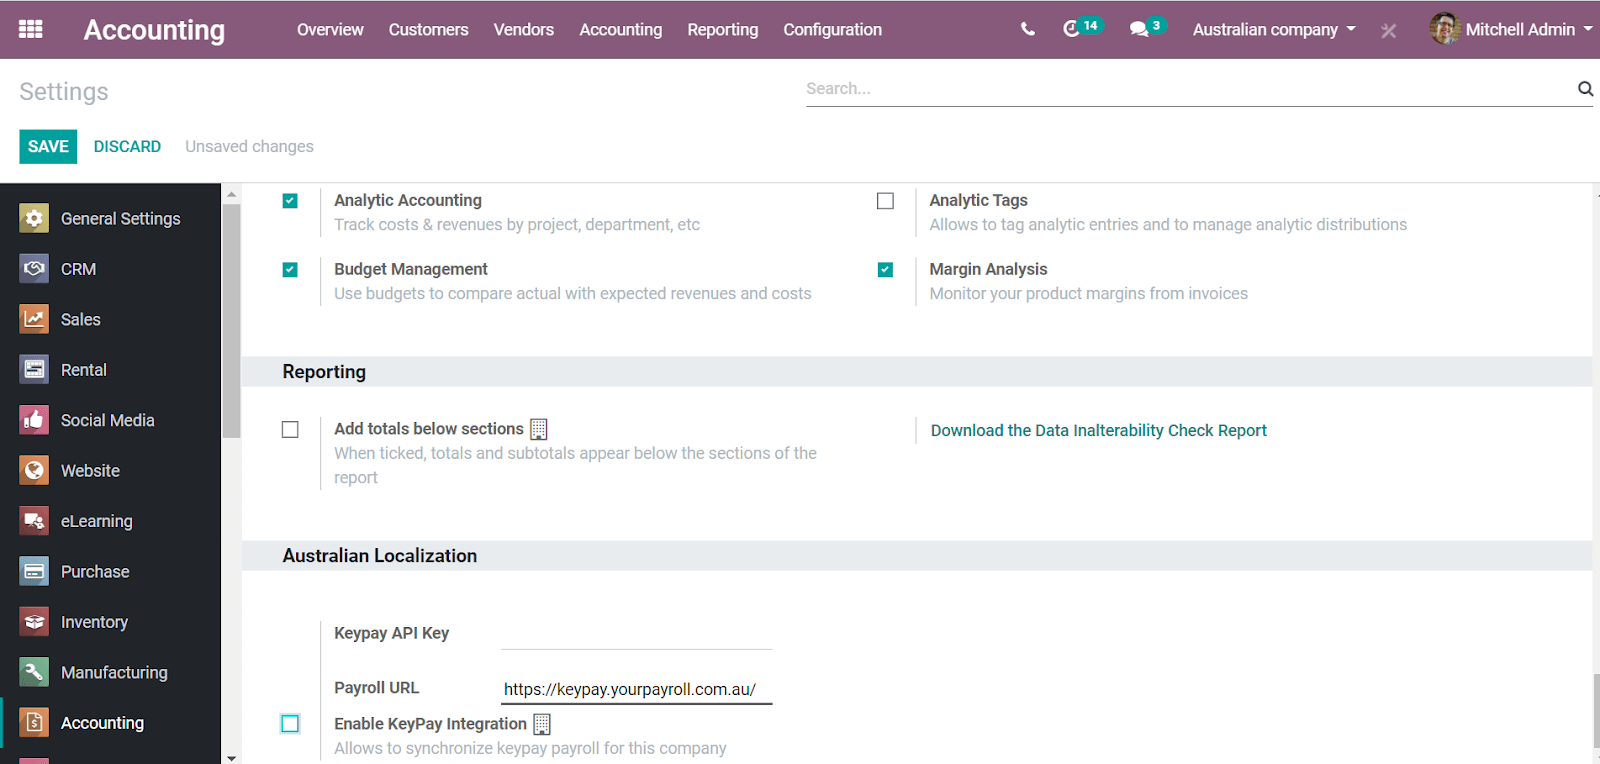 CoquiAPPs Accounting settings includes a section for the Australian Loclization